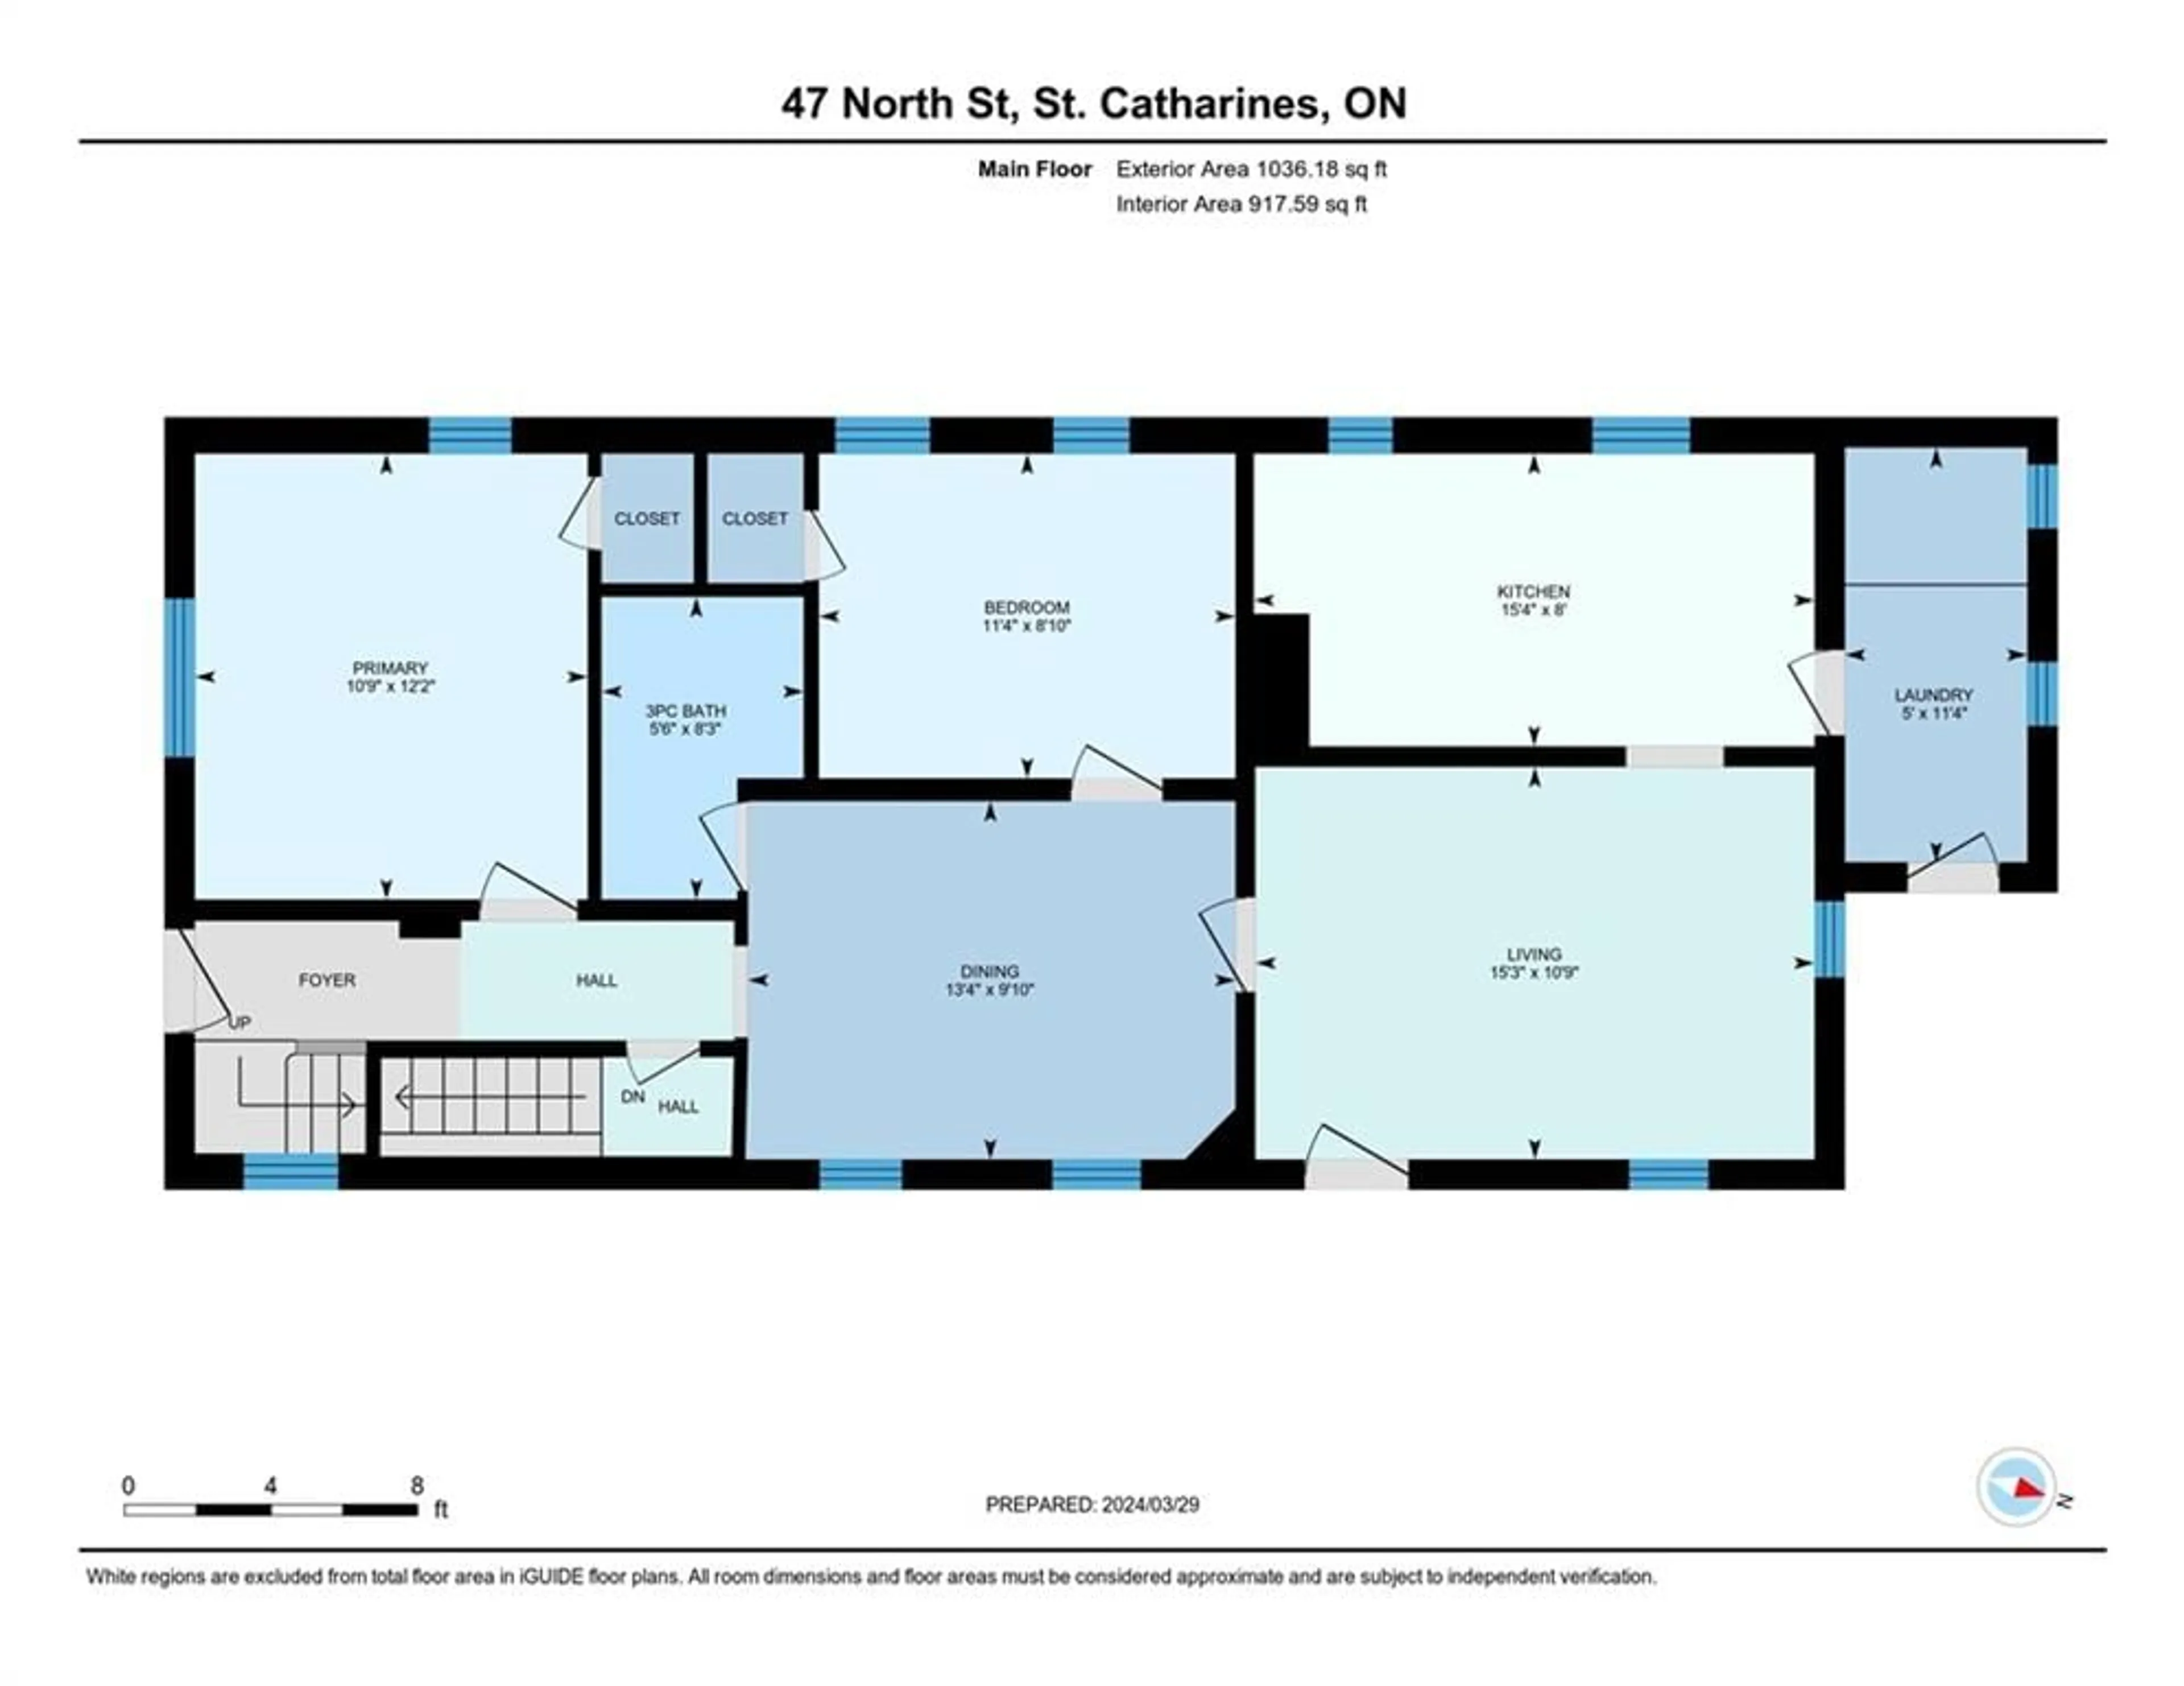 Floor plan for 47 North St, St. Catharines Ontario L2R 2S3